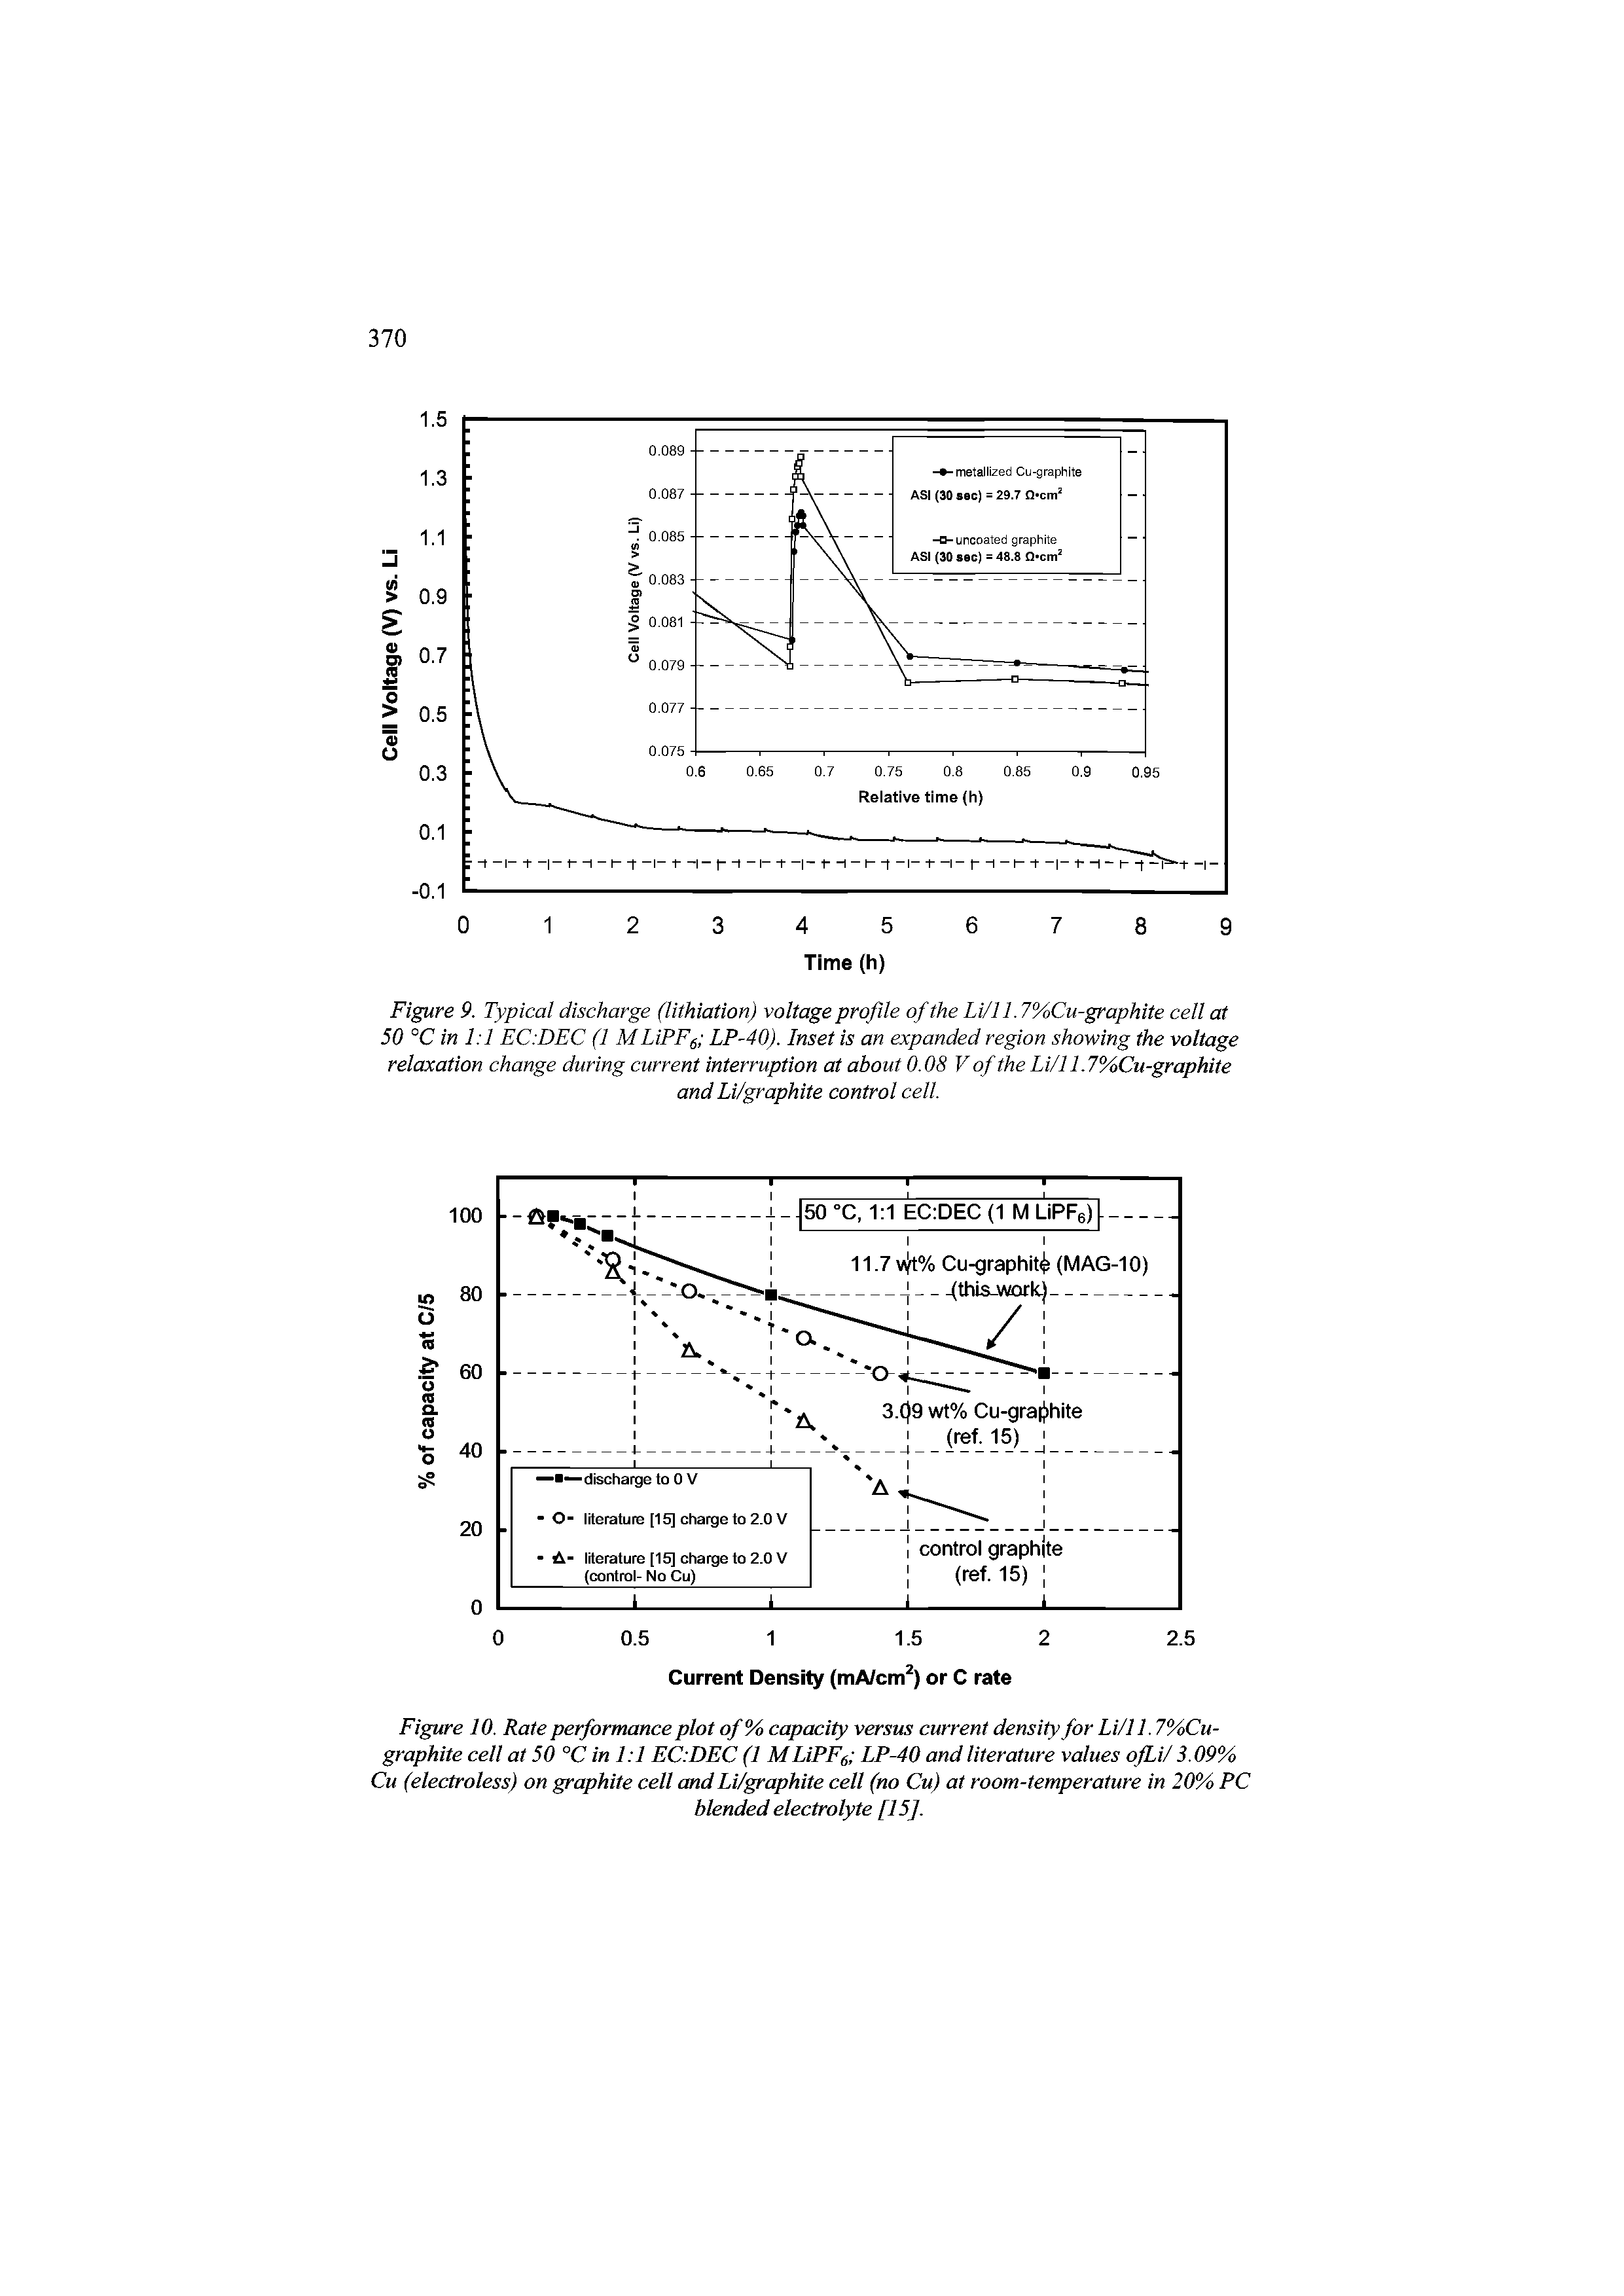 Figure 9. Typical discharge (lithiation) voltage profile of the Li/11.7%Cu-graphite cell at 50 °C in 1 1 EC DEC (1 MLiPF LP-40). Inset is an expanded region showing the voltage relaxation change during current interruption at about 0.08 V of the Li/11,7%Cu-graphite and Li/graphite control cell.